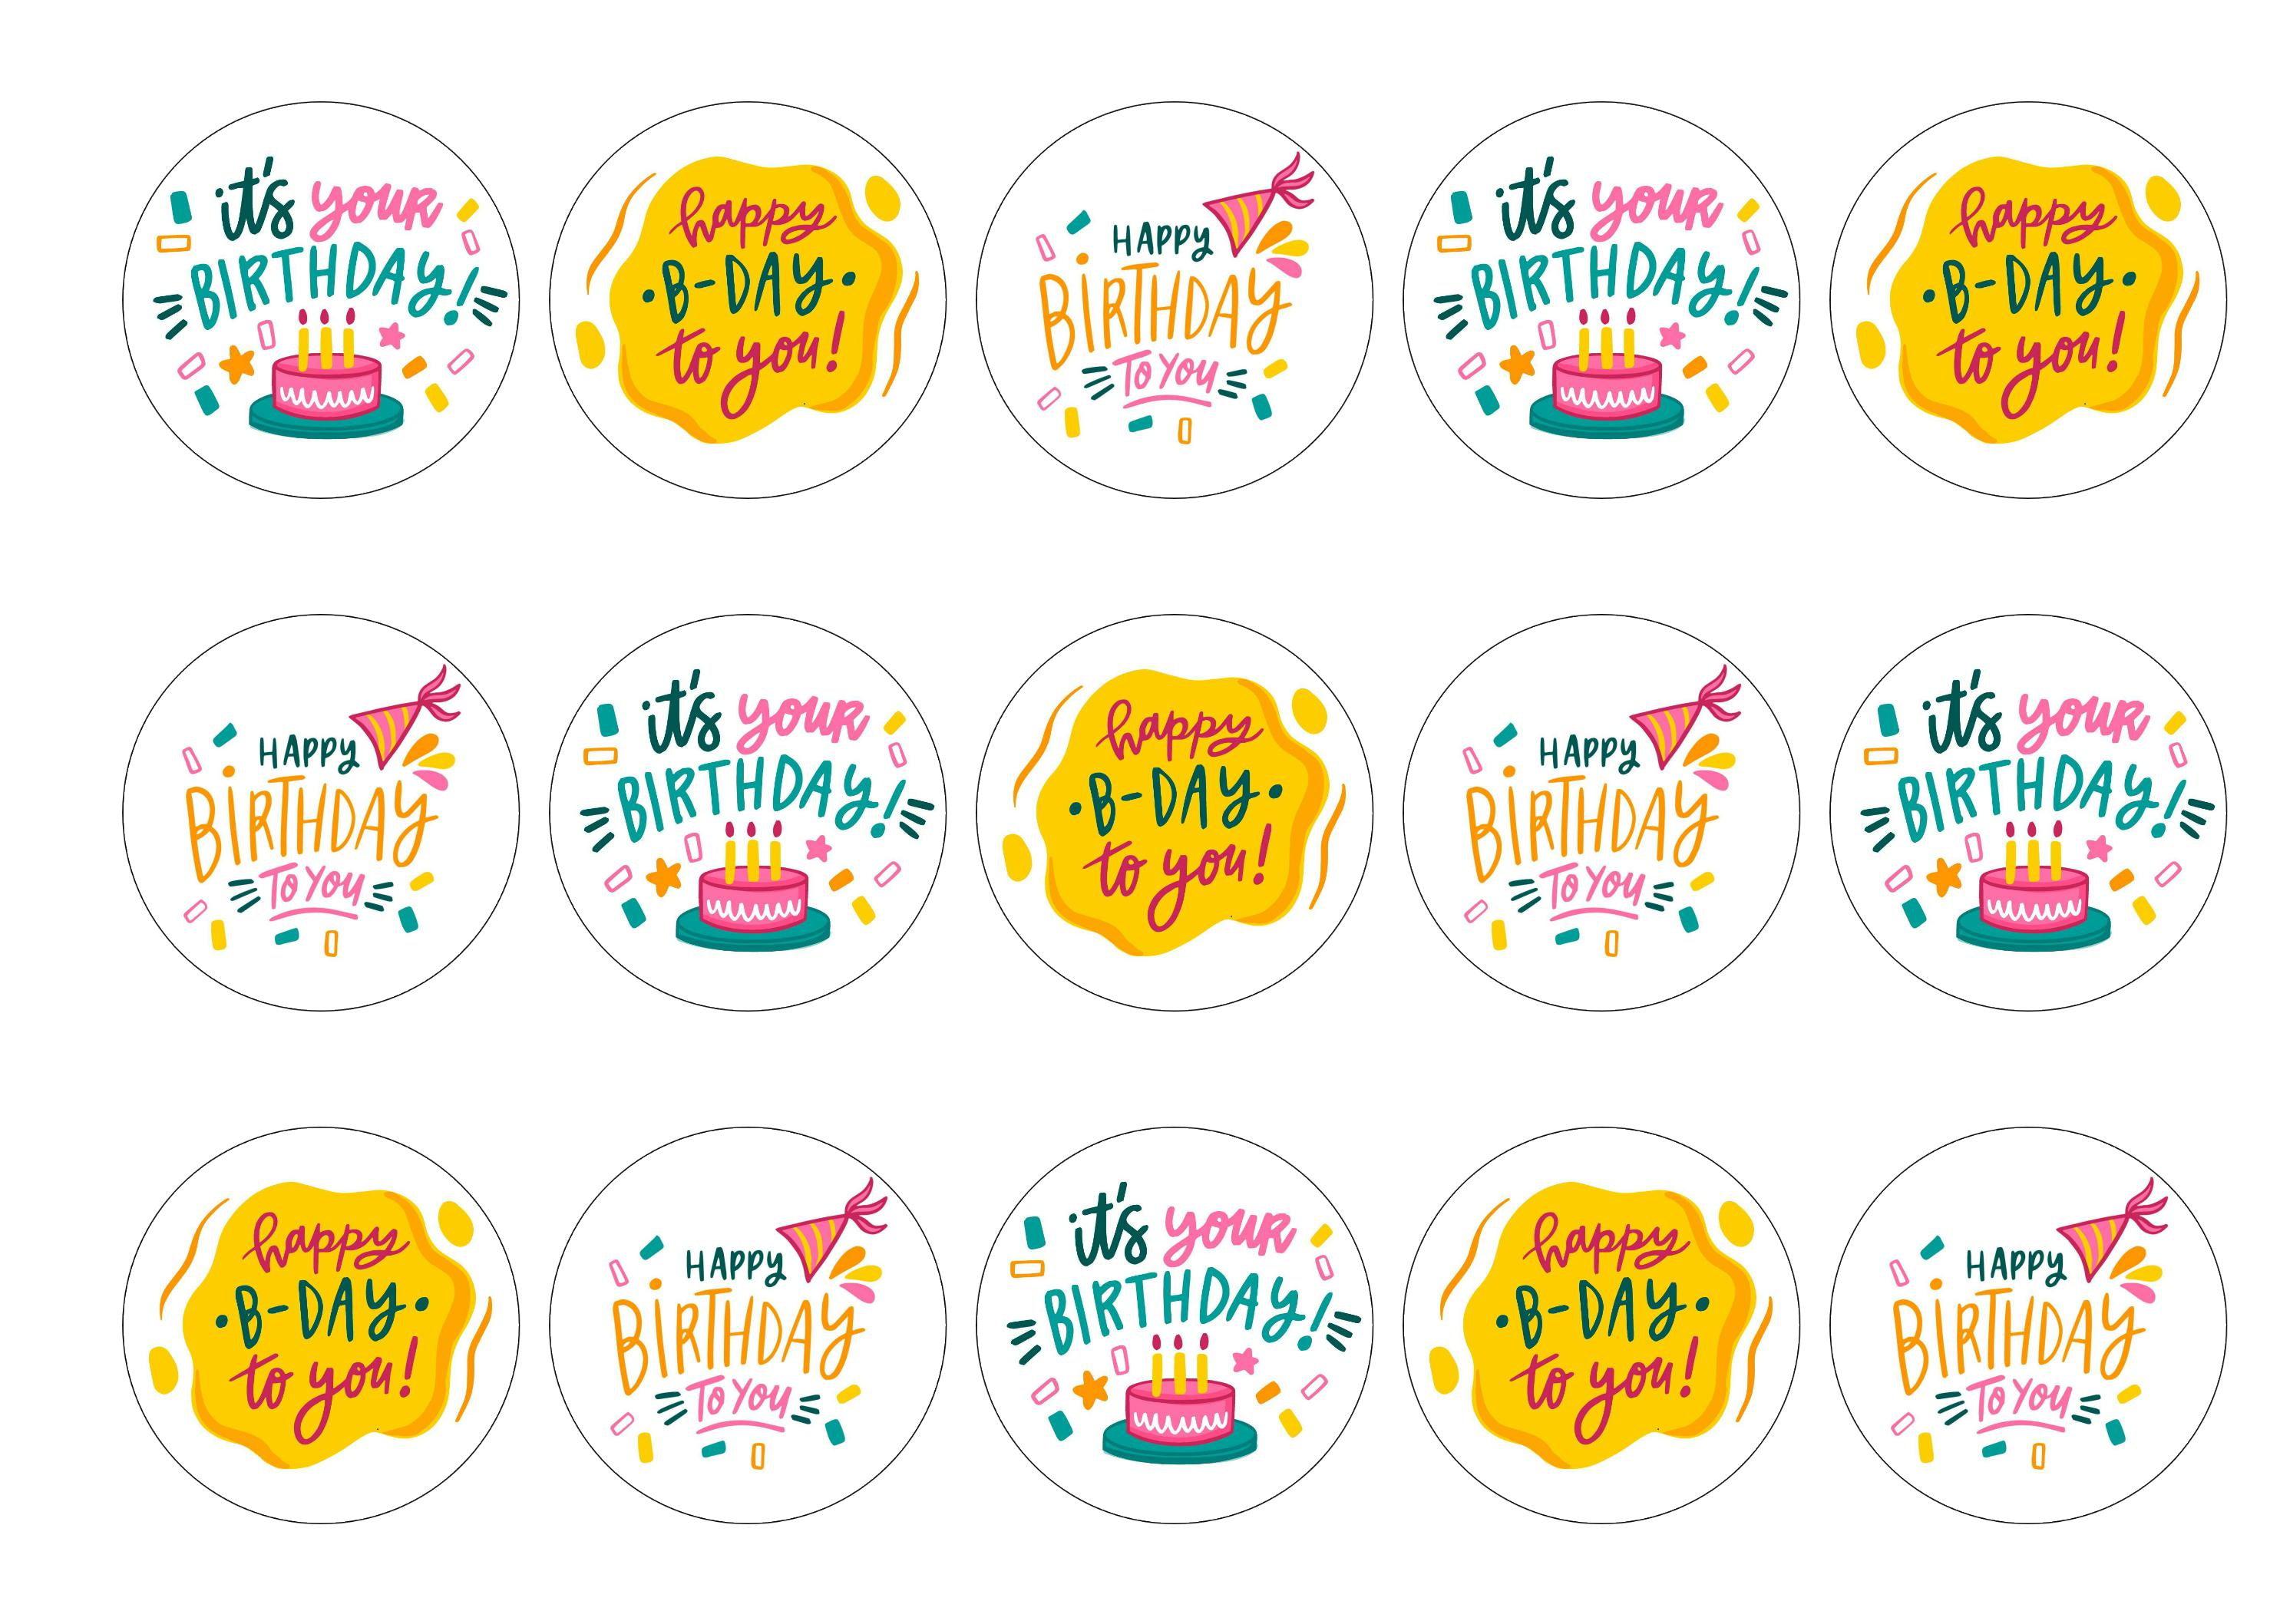 15 printed cupcake toppers with mixed birthday Greetings